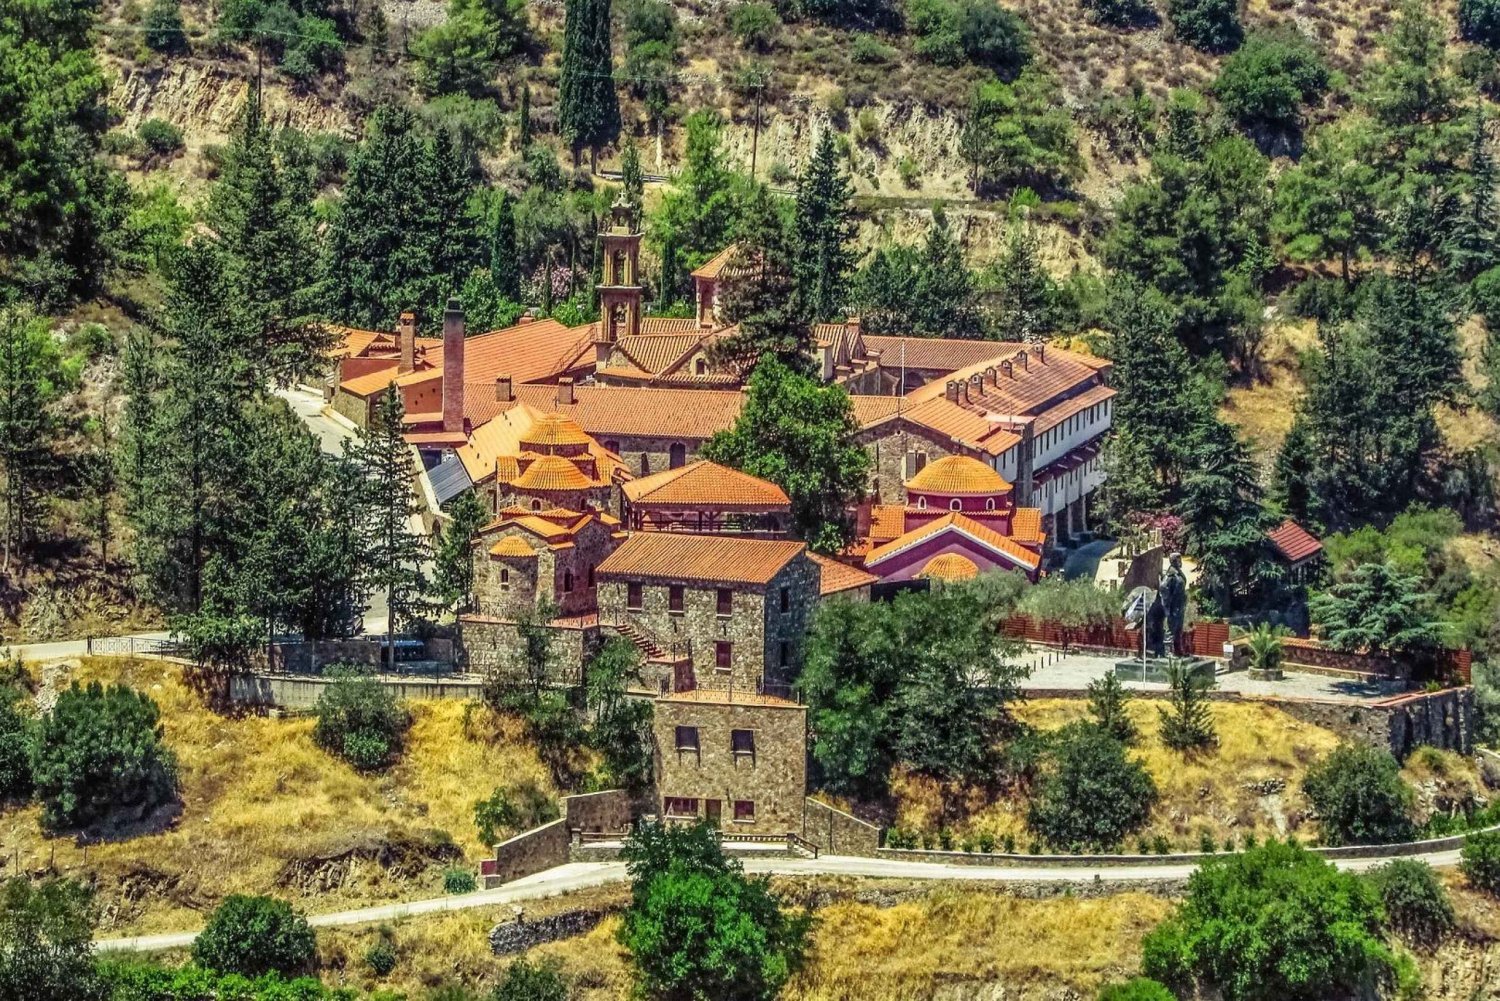 Troodos Villages and Kykkos Monastery from Paphos in Polish